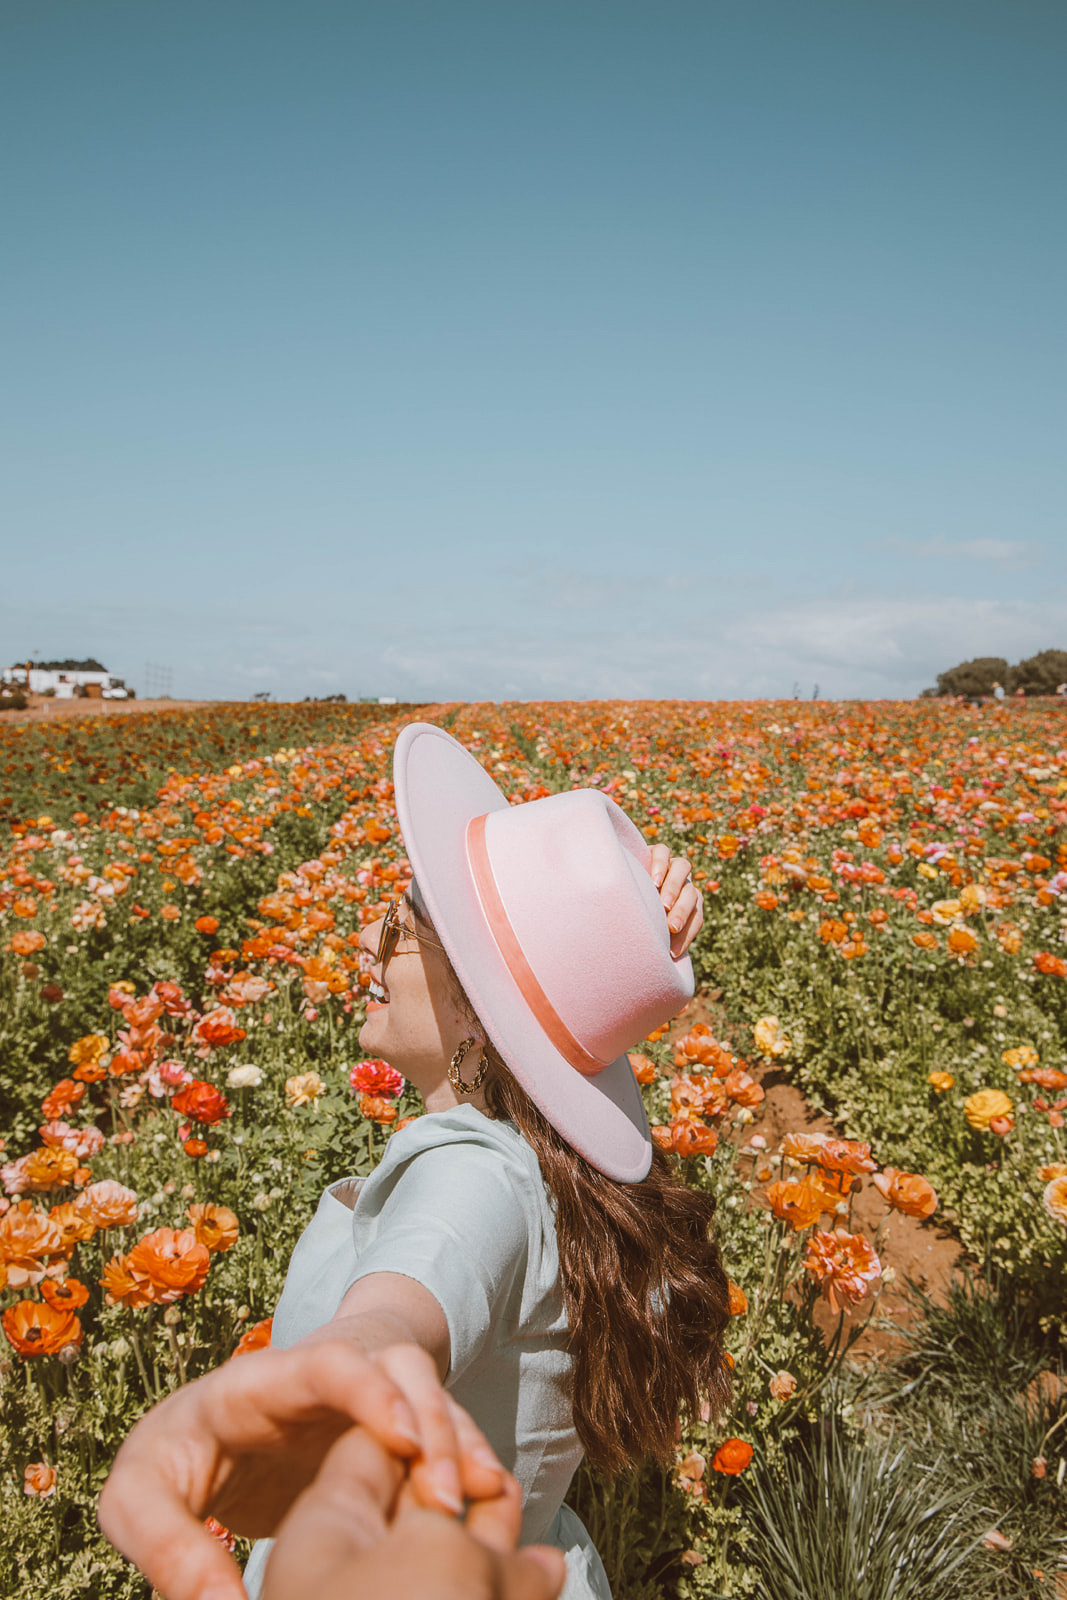 999+ Woman Holding Flower Pictures | Download Free Images on Unsplash